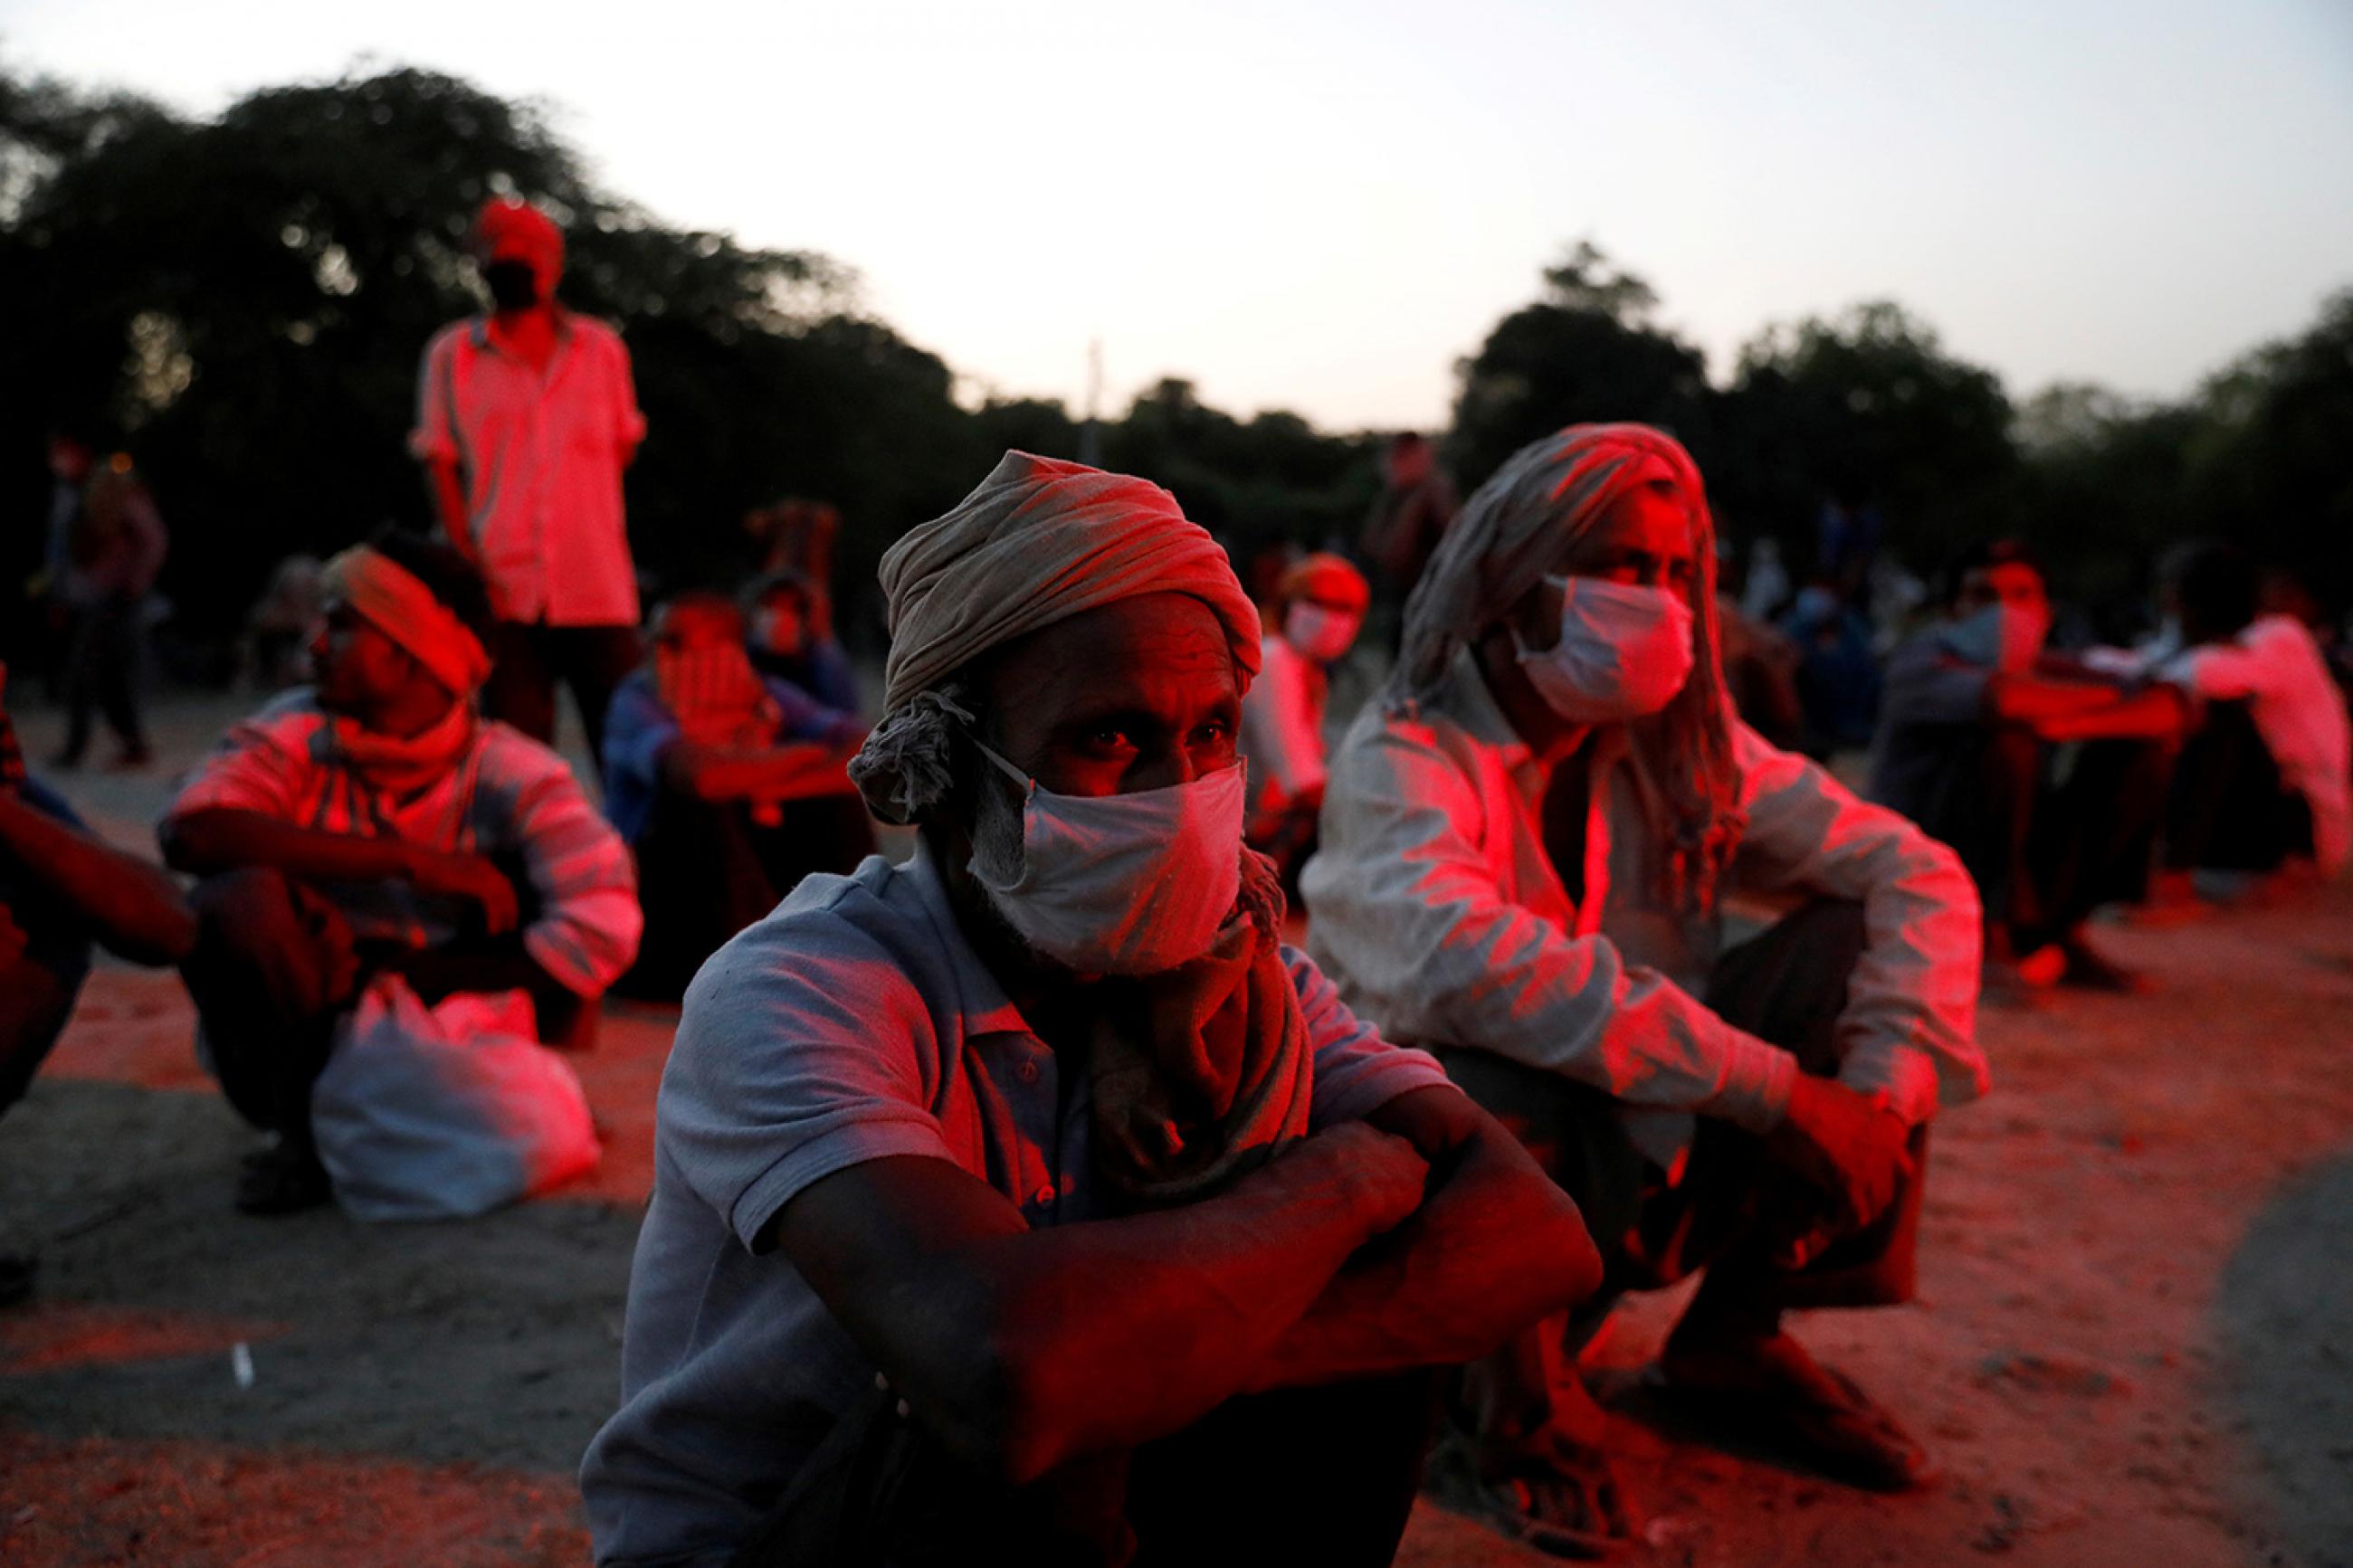 Migrant workers and homeless people wait on the banks of Yamuna river in Delhi on April 15, 2020, as police arrange buses to transfer them to shelters after India extended a nationwide lockdown. This is an eerie and haunting photo with several people sitting on the ground in an outdoor location in low lighting. They are bathed in a dark red light. REUTERS/Anushree Fadnavis 